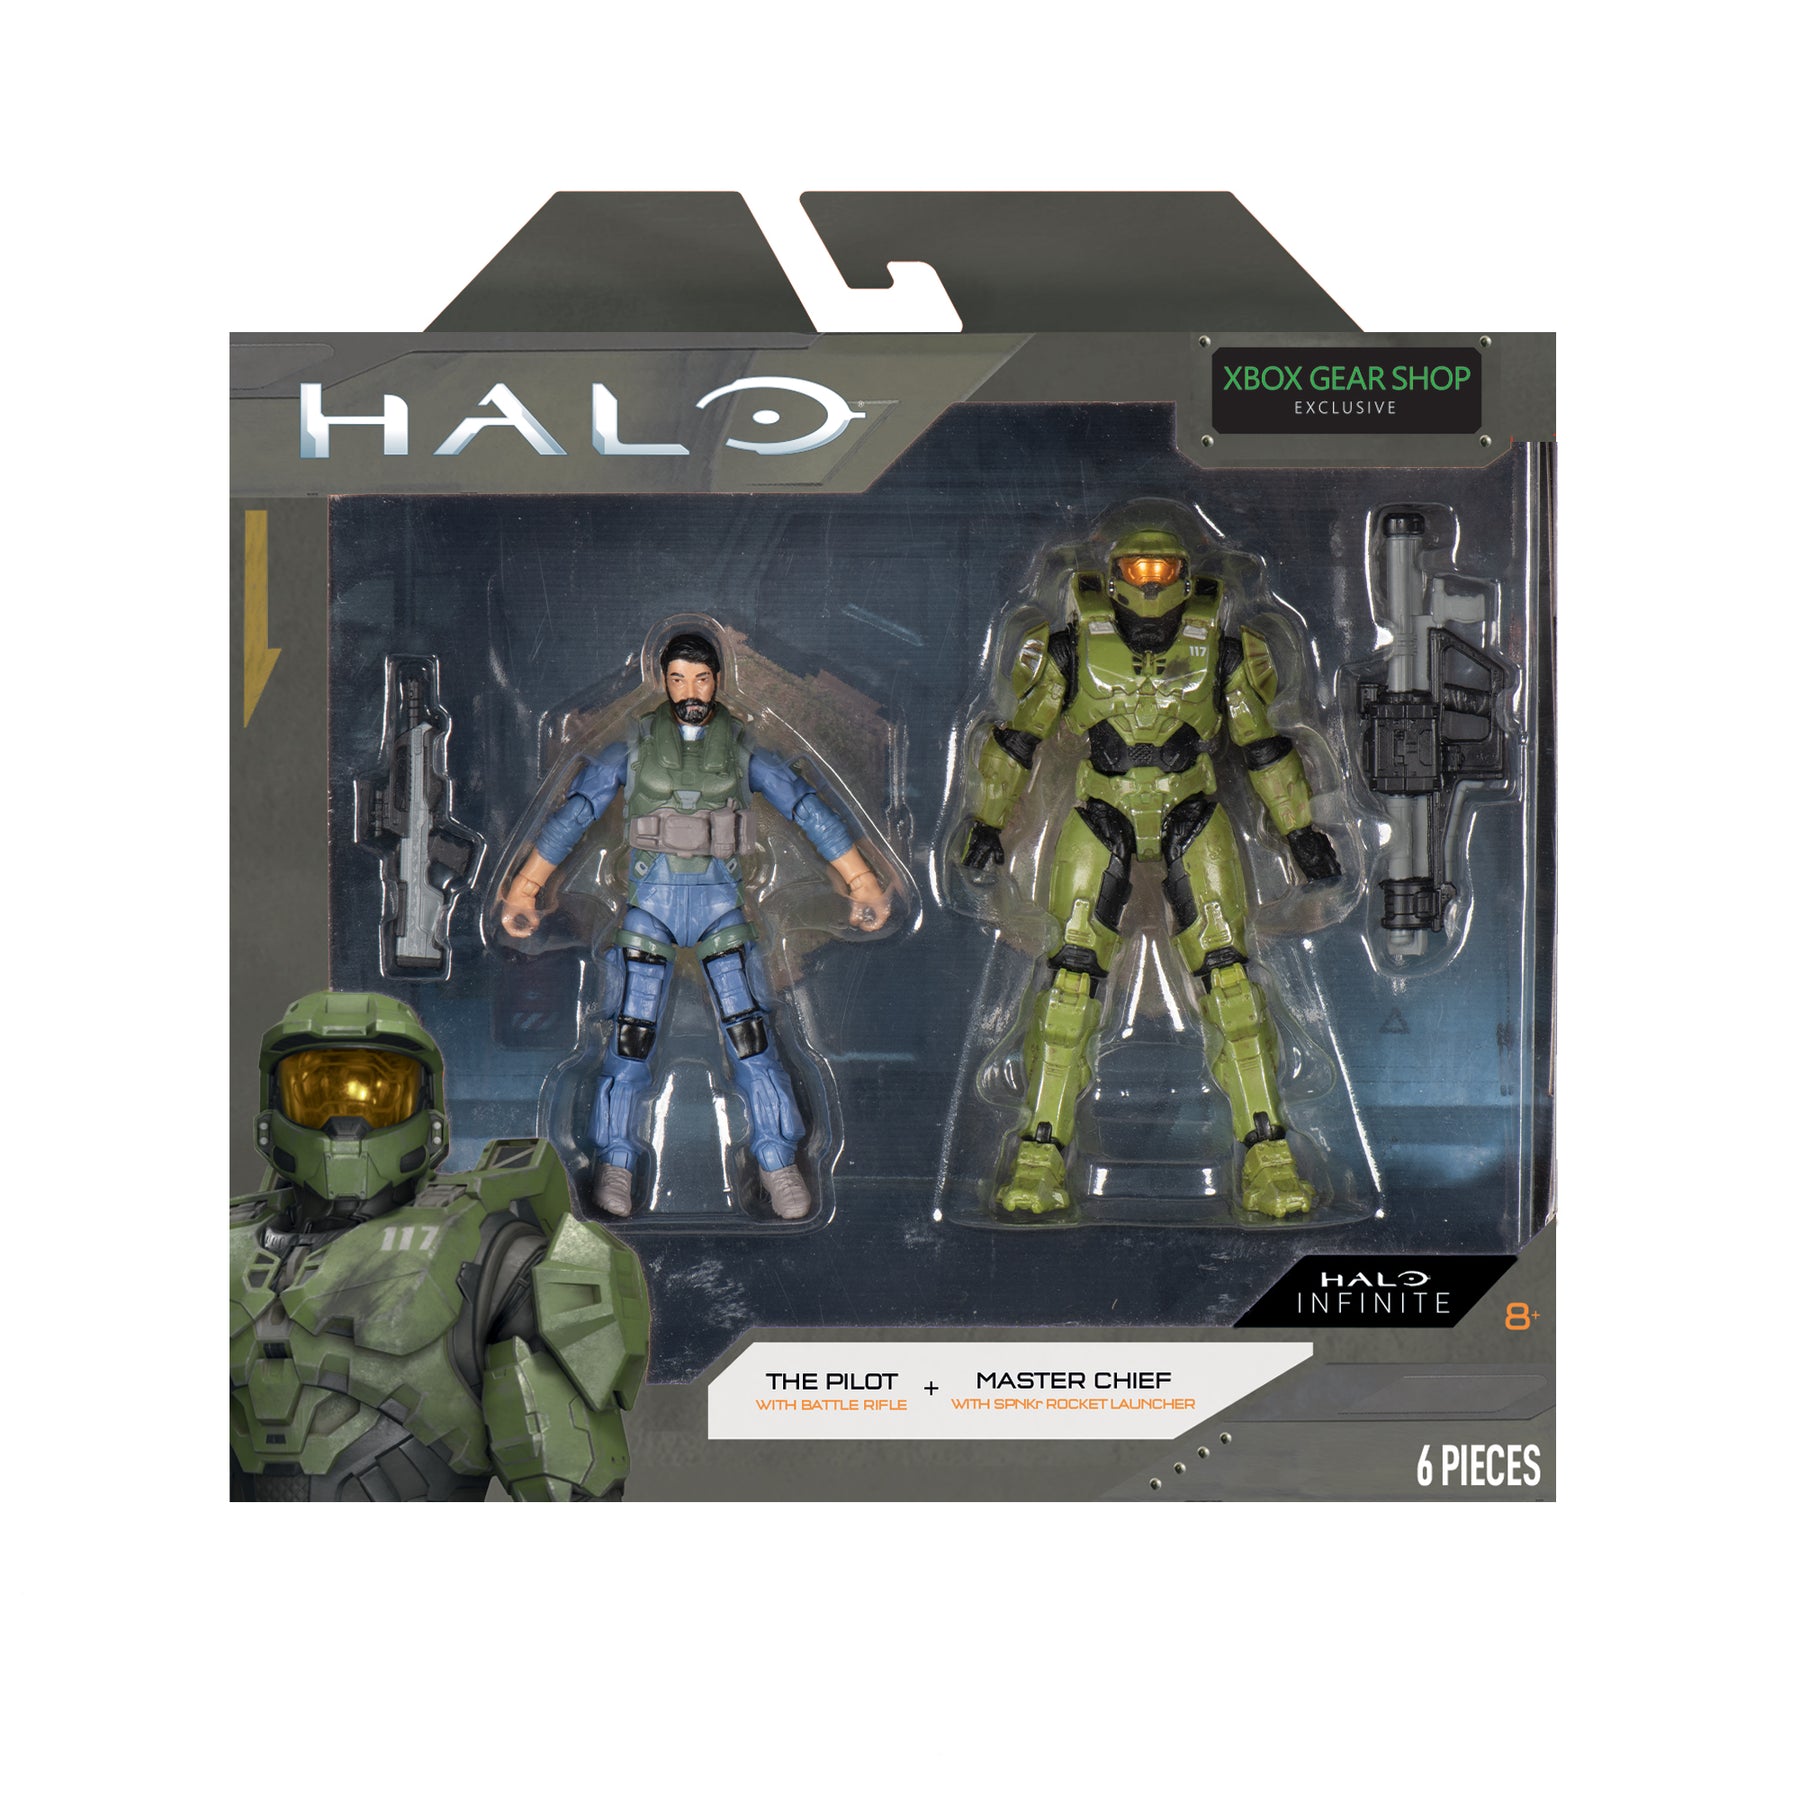 Halo Action Figure 4 Pack, 12 Inch Toy Collectibles 